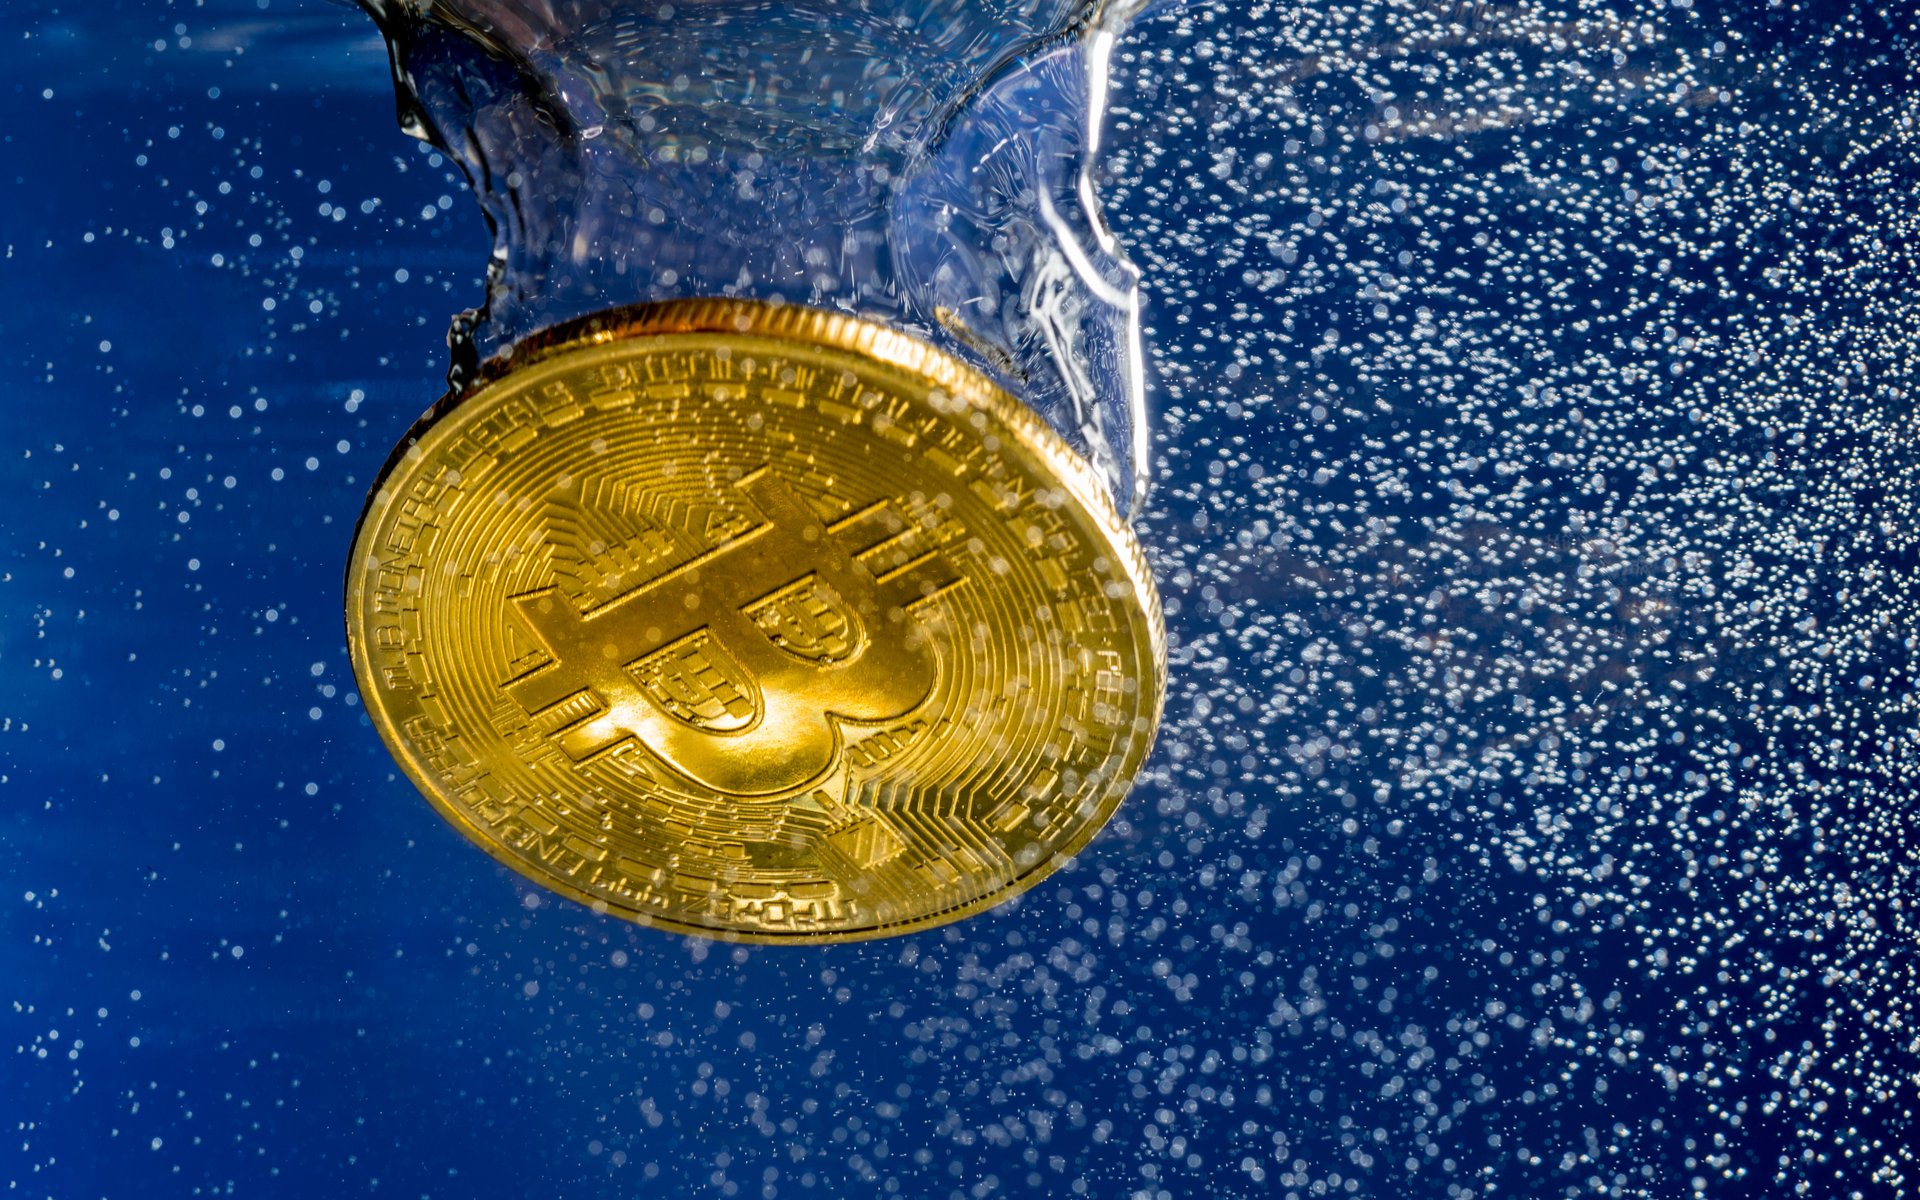 Bitcoin fees transaction fees water